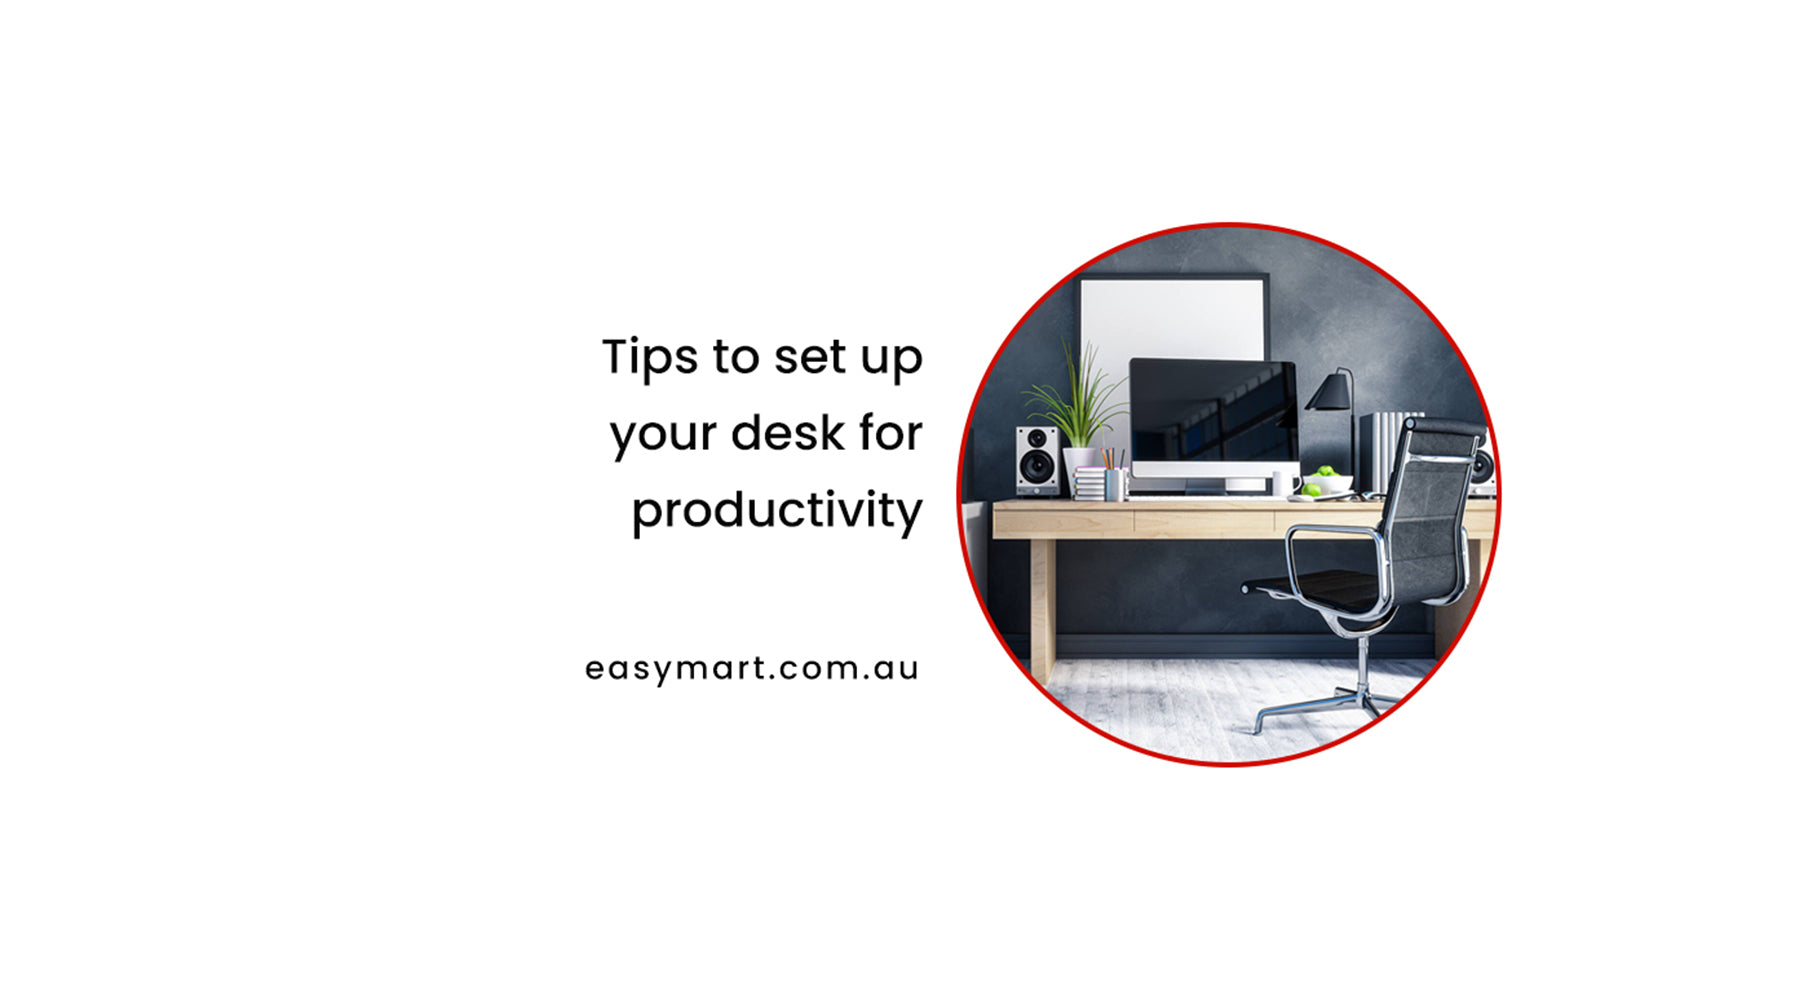 Tips to set up your desk for productivity